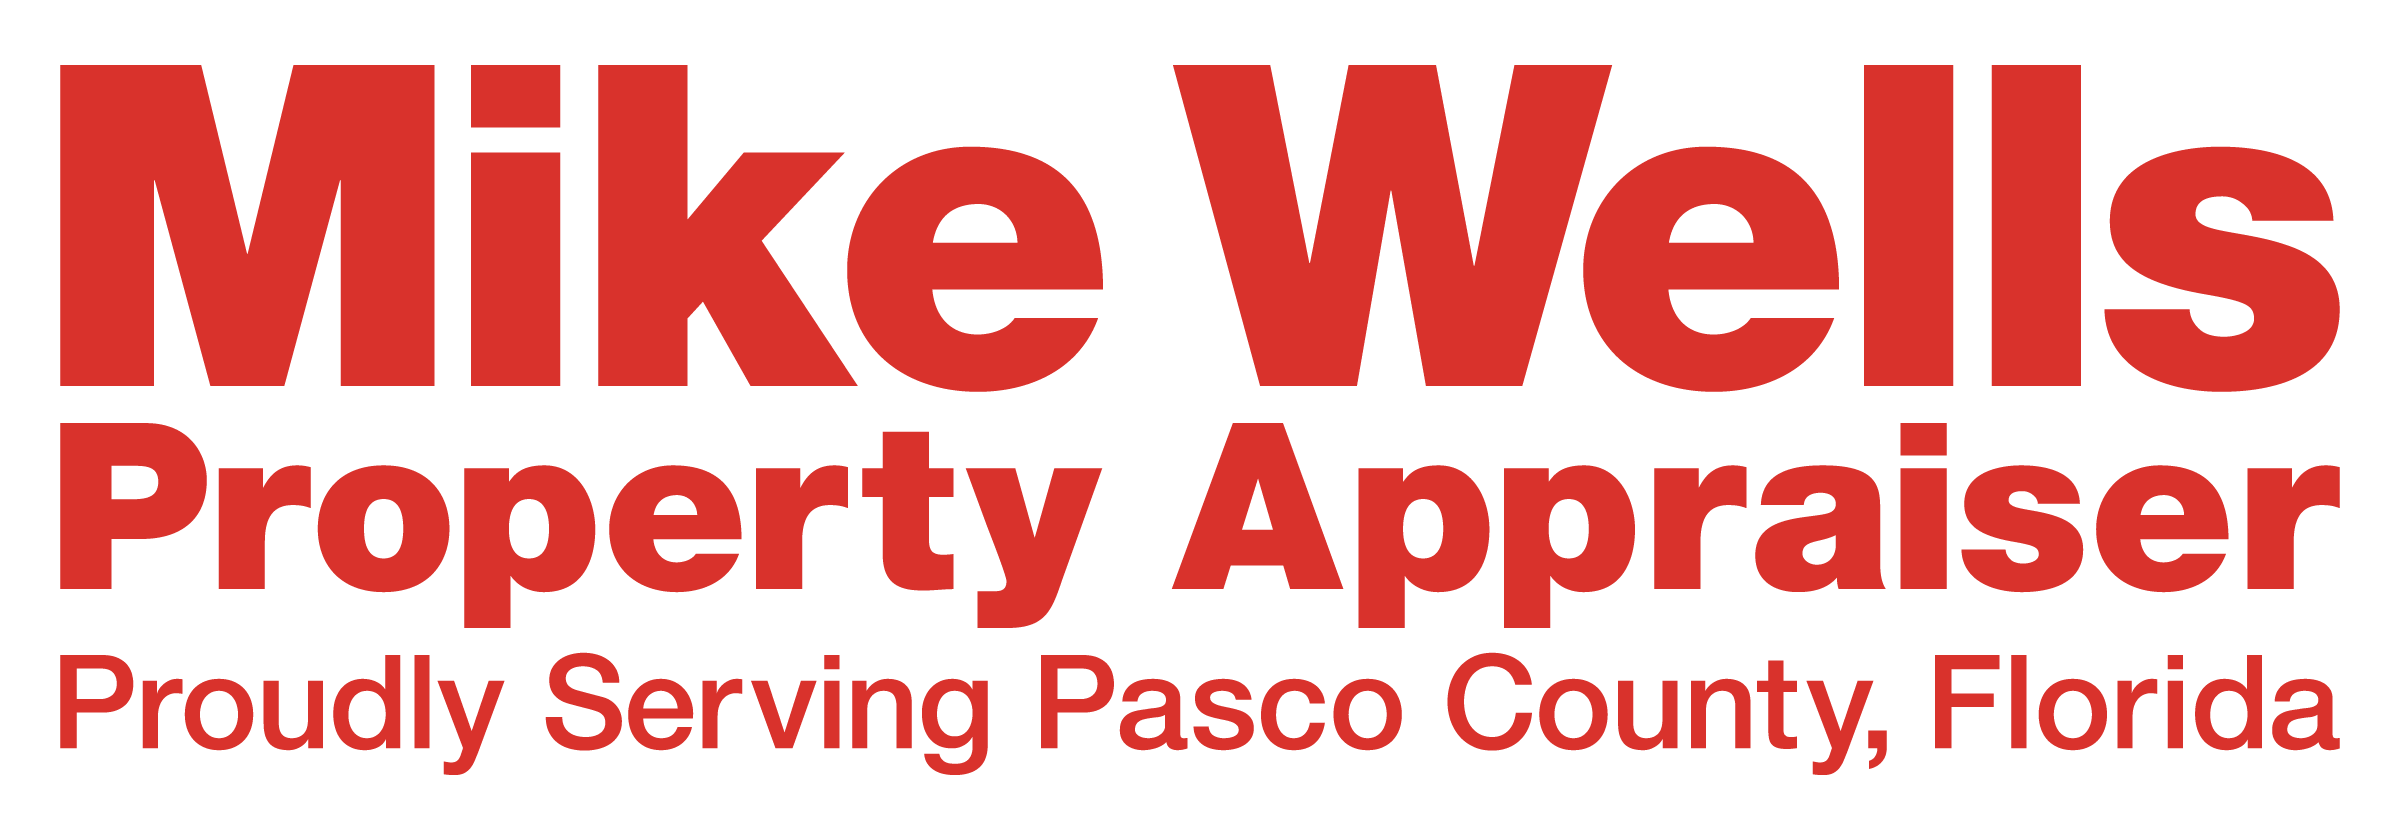 Mike Wells Property Appraiser for Pasco County